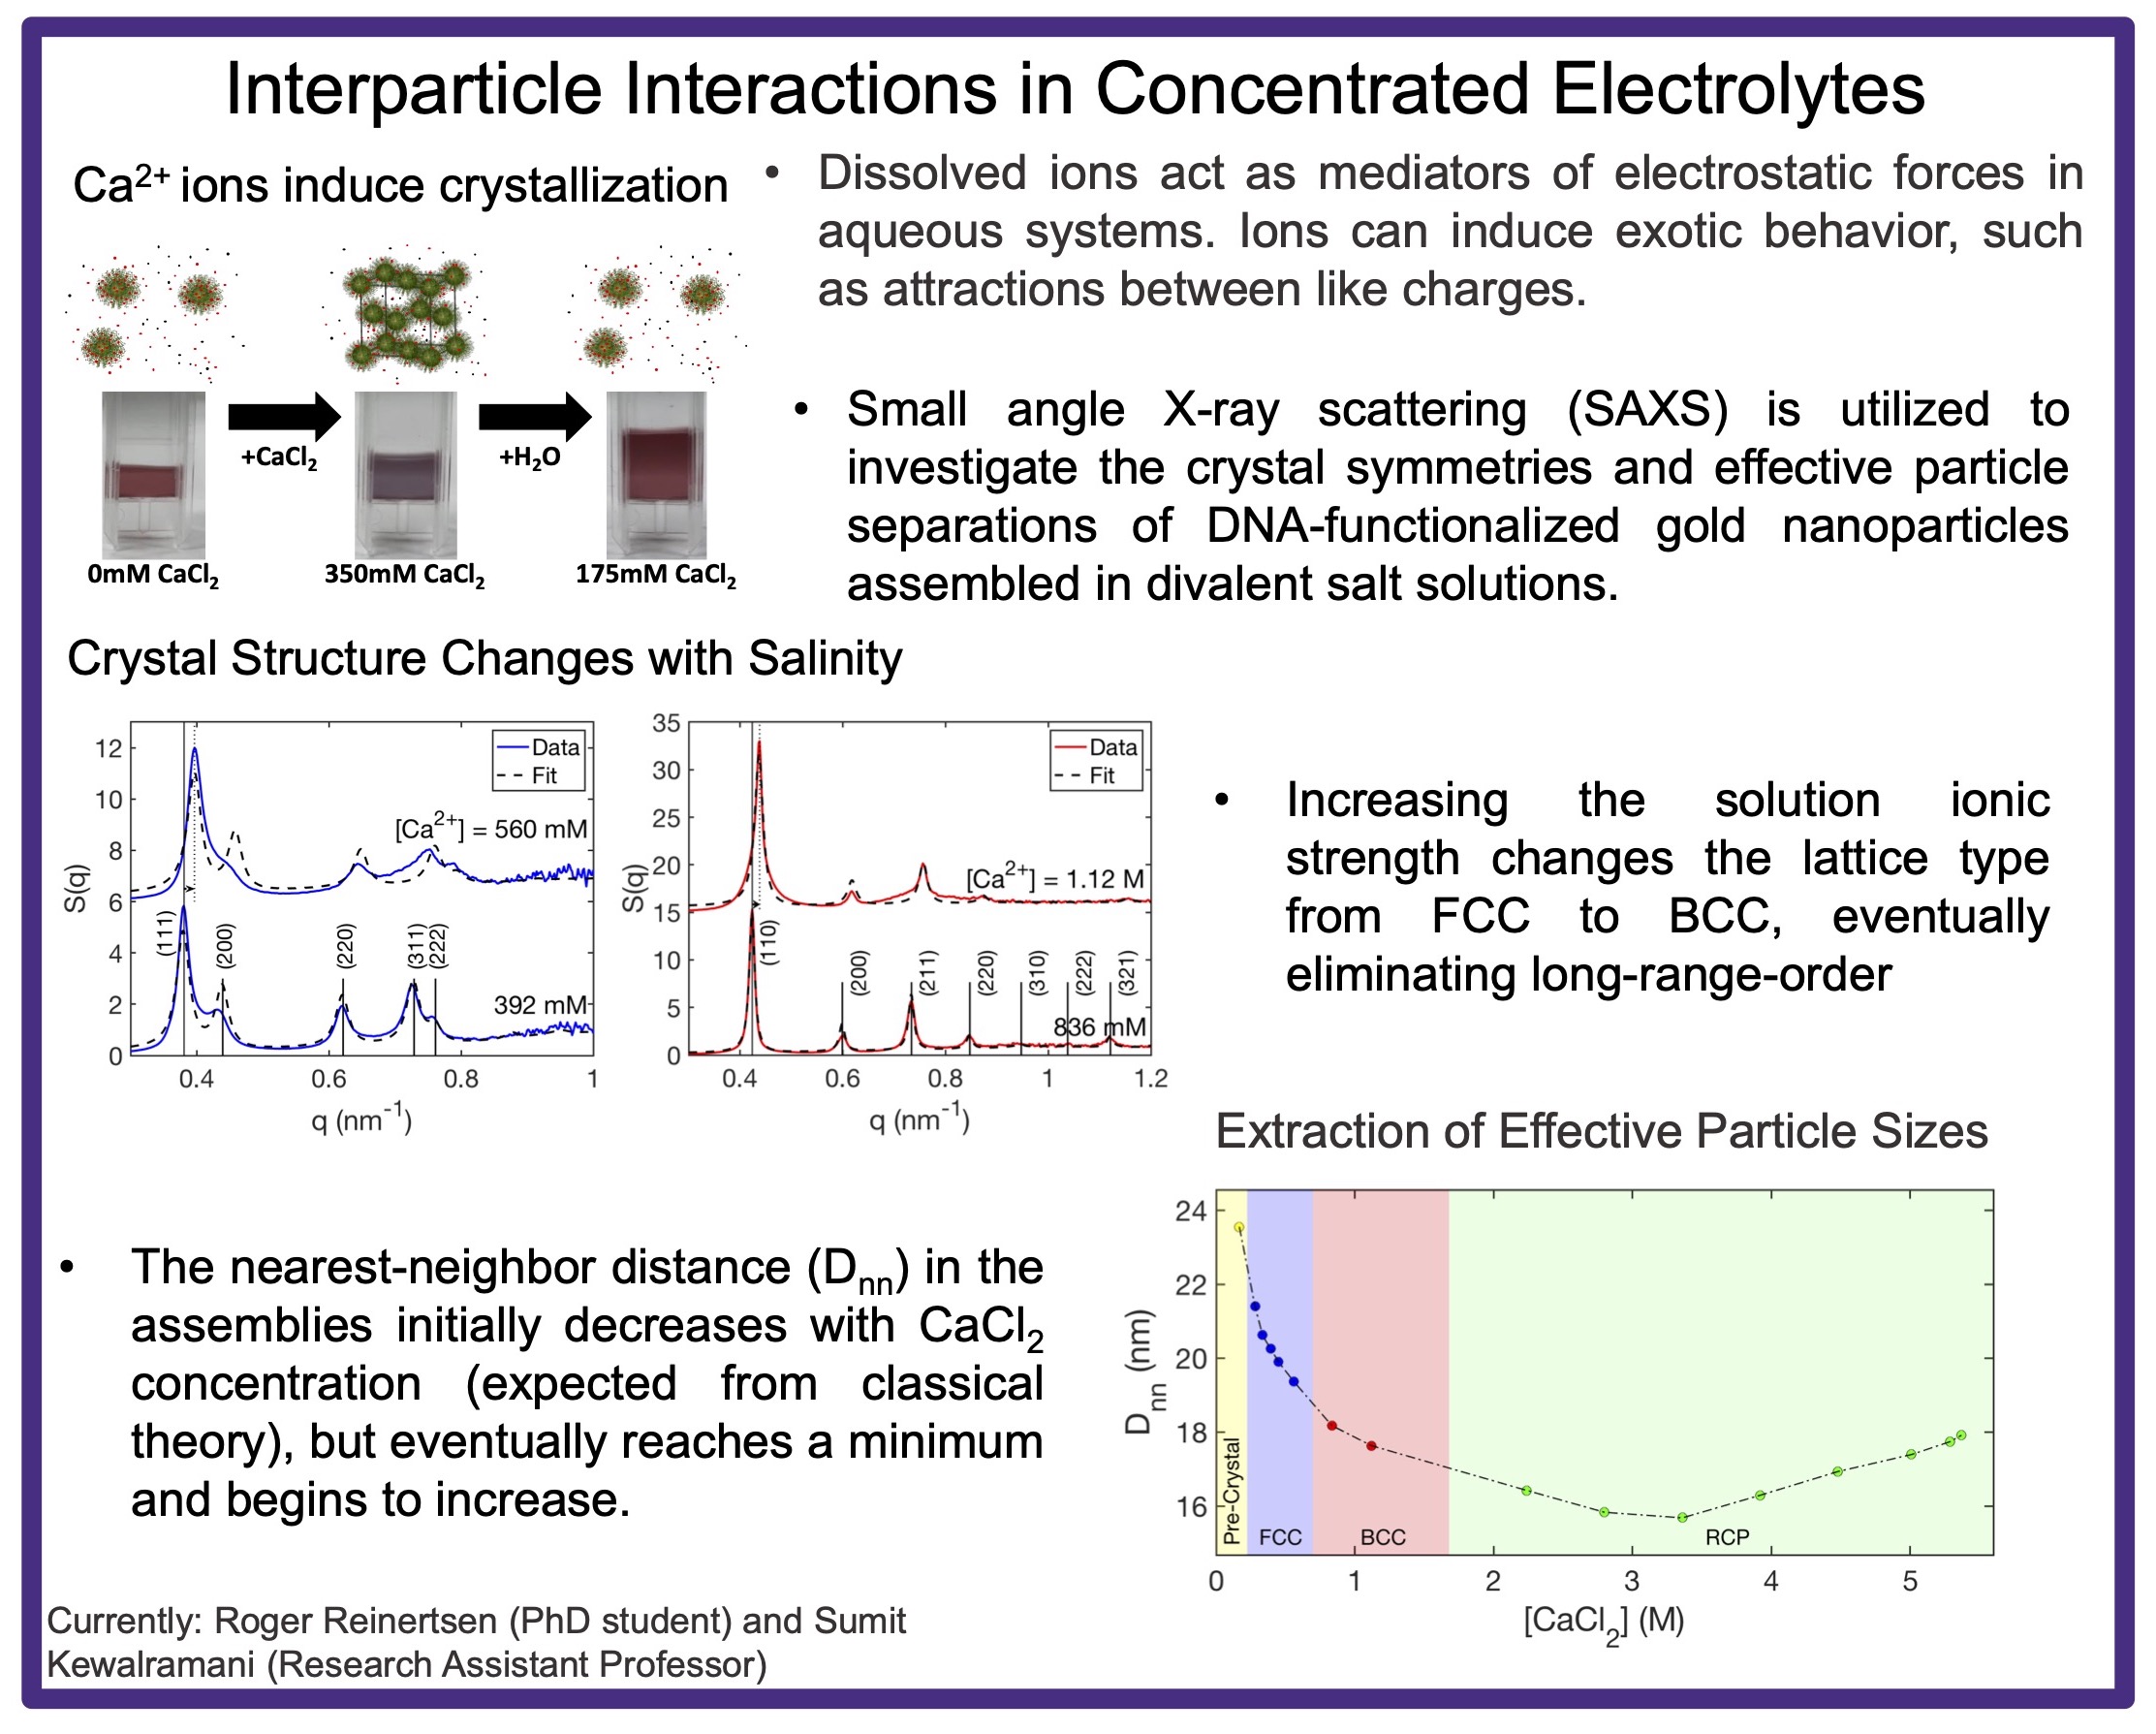 Interparticle Interactions in Concentrated Electrolytes. Figure: Calcium 2+ ions induce crystallization. Dissolved ions act as mediators of electrostatic forces in aqueous systems. Ions can induce exotic behavior, such as attractions between like charges. Small-angle X-ray scattering (SAXS) is utilized to investigate the crystal symmetries and effective particle separations of DNA-functionalized gold nanoparticles assembled in divalent salt solutions. Figure: Crystal structure changes with salinity. Increasing the solution ionic strength changes the lattice type from FCC to BCC, eventually eliminating long-range order. The nearest-neighbor distance in the assemblies initially decreases with calcium chloride concentration (expected from classical theory), but eventually reaches a minimum and begins to increase. Figure: Extraction of Effective Particle Sizes. Currently: Roger Reinertsen (PhD student) and Sumit Kewalramani (Research Assistant Professor)